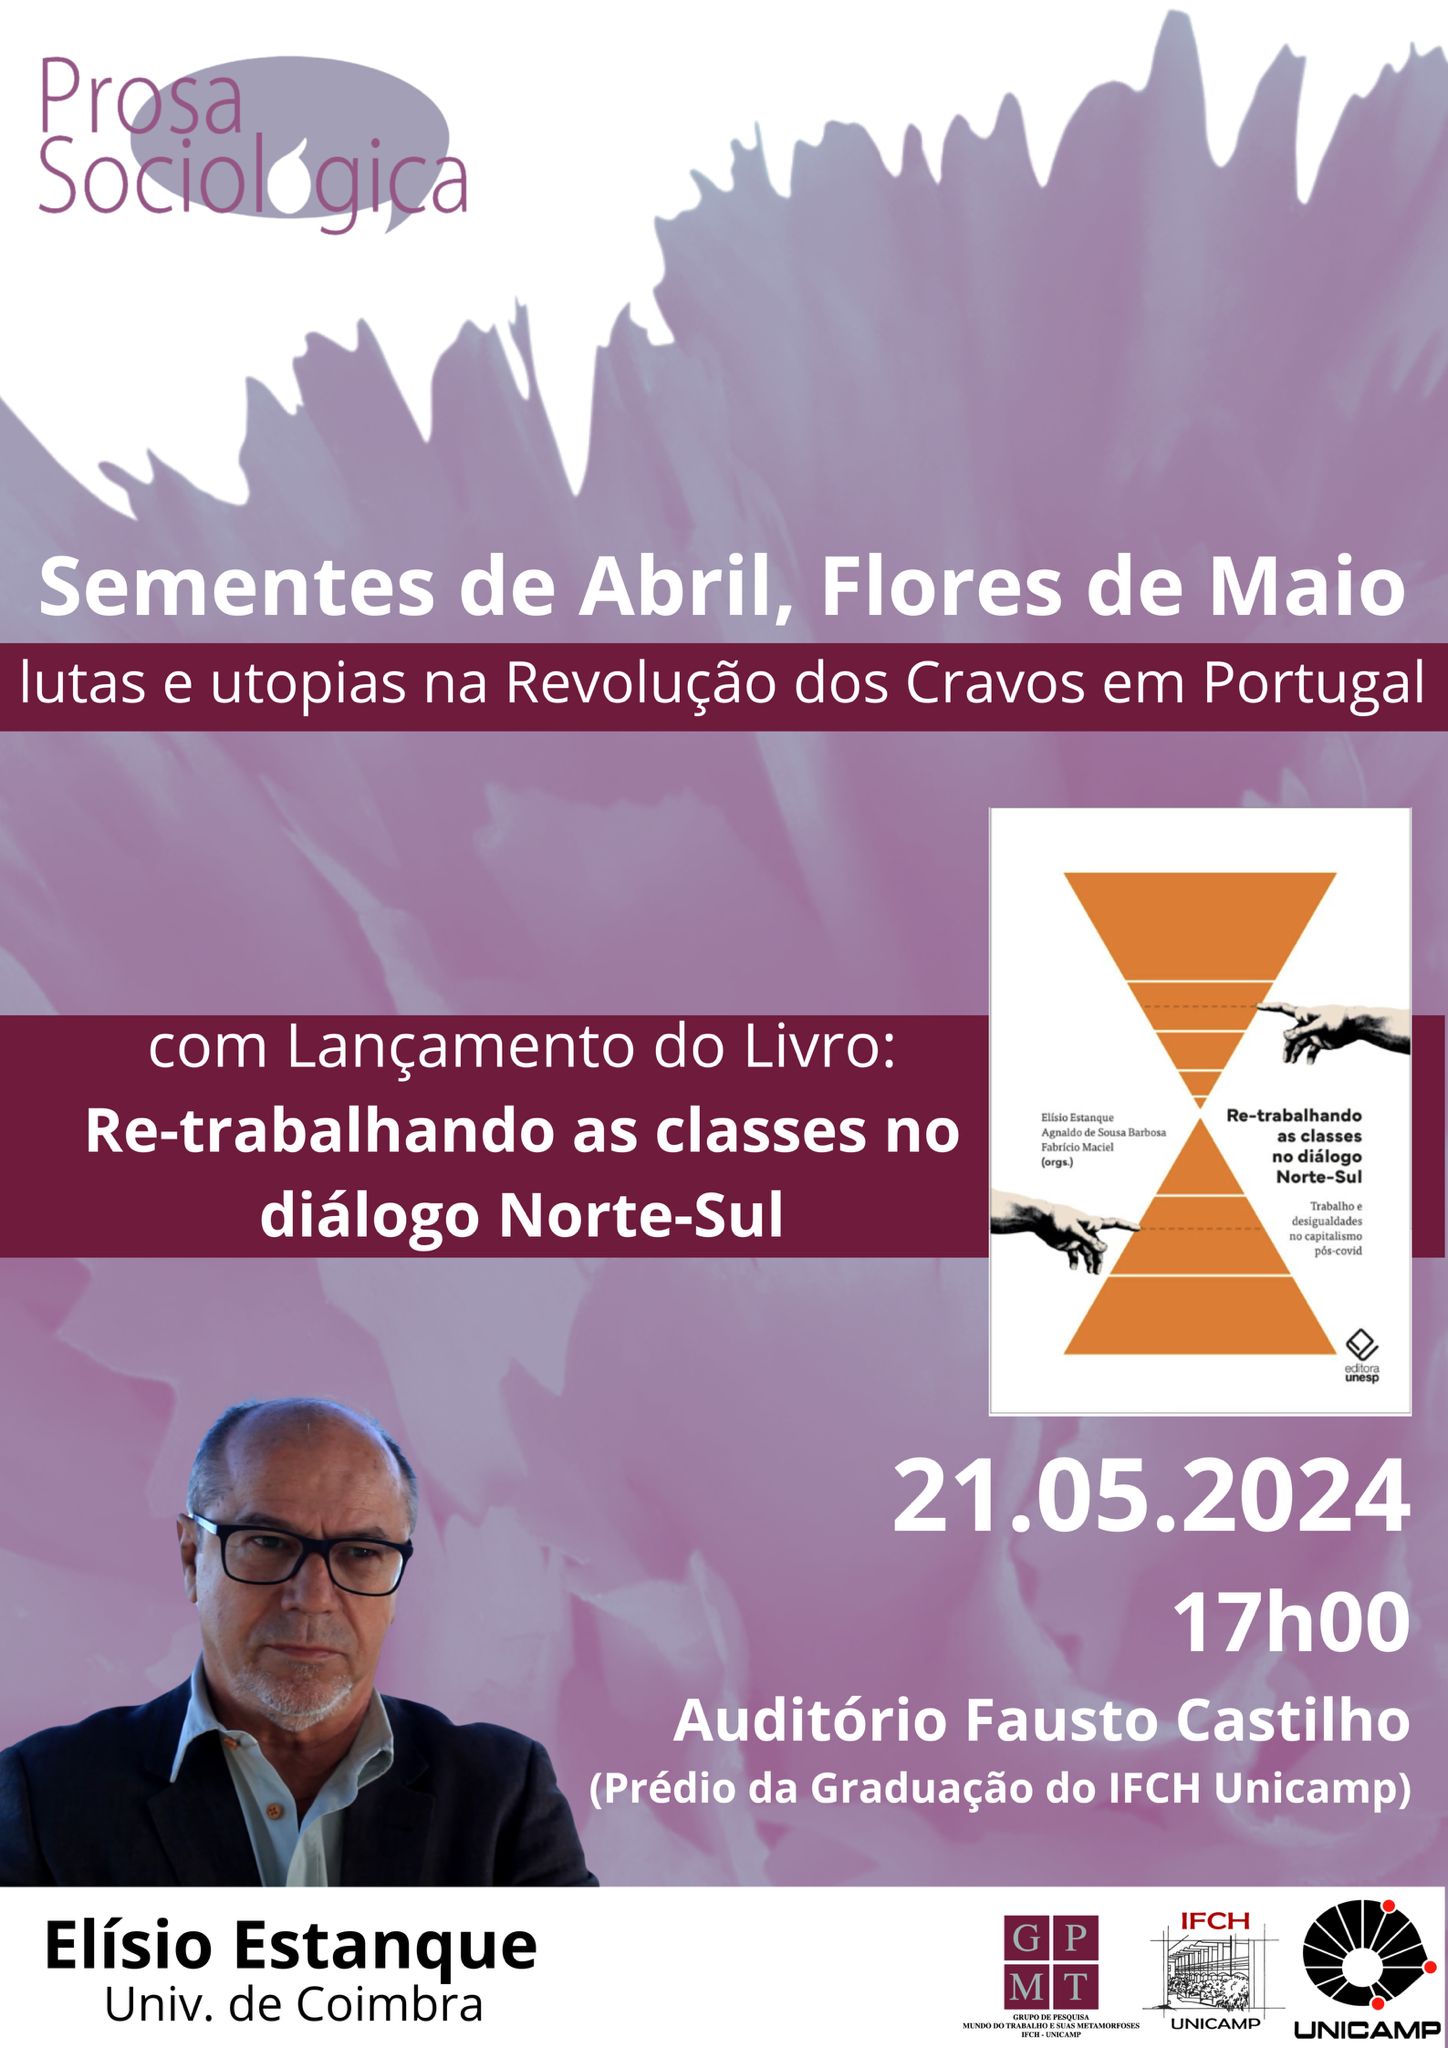 Seeds of April, Flowers of May | Struggles and utopias in Portugal's Carnation Revolution<span id="edit_45897"><script>$(function() { $('#edit_45897').load( "/myces/user/editobj.php?tipo=evento&id=45897" ); });</script></span>